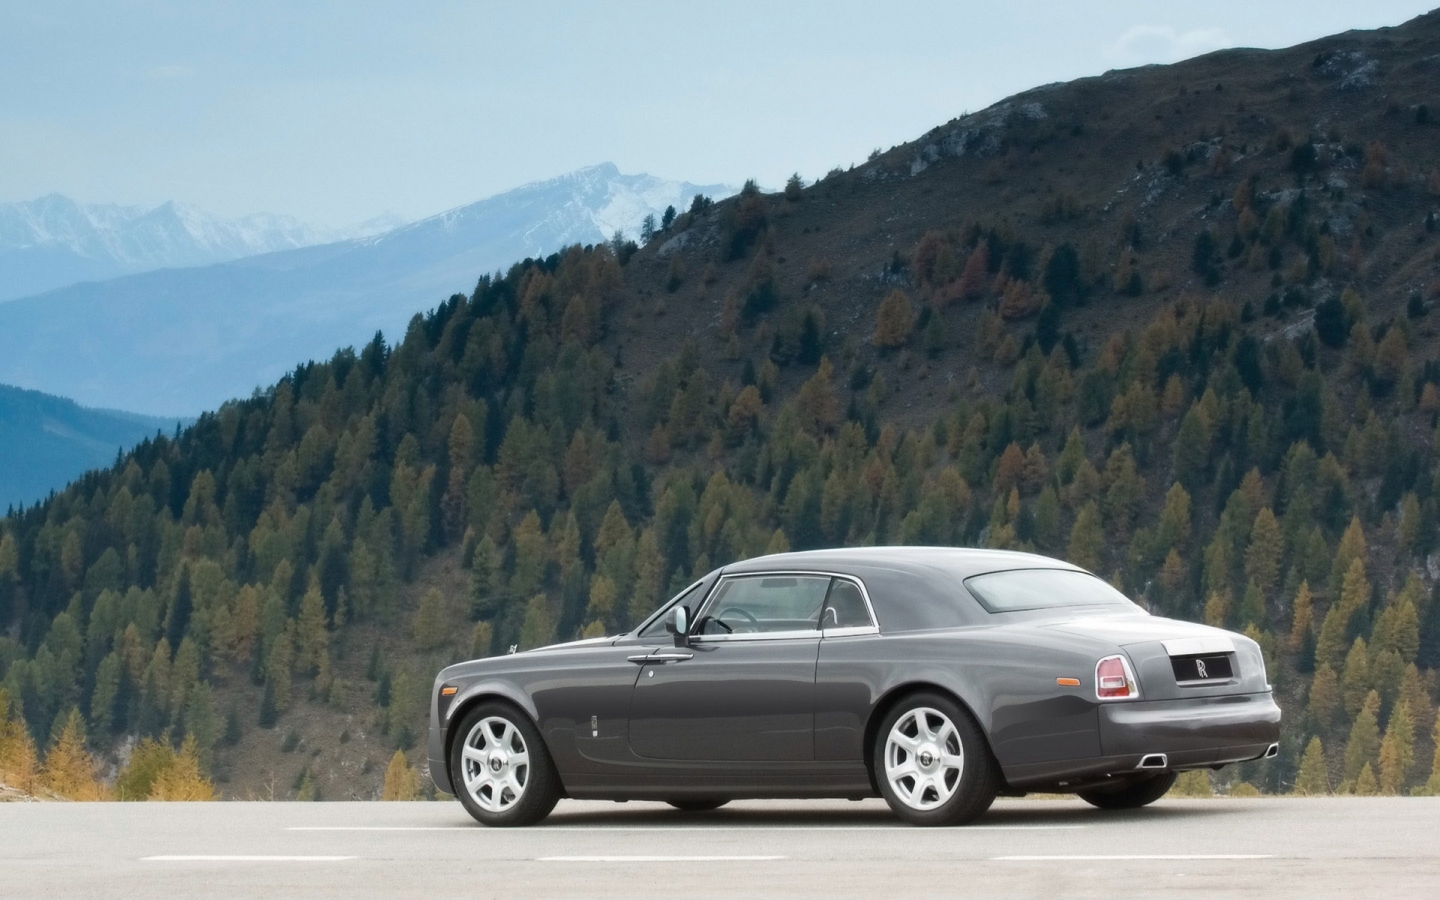 Amazing Rolls Royce Side Angle for 1440 x 900 widescreen resolution